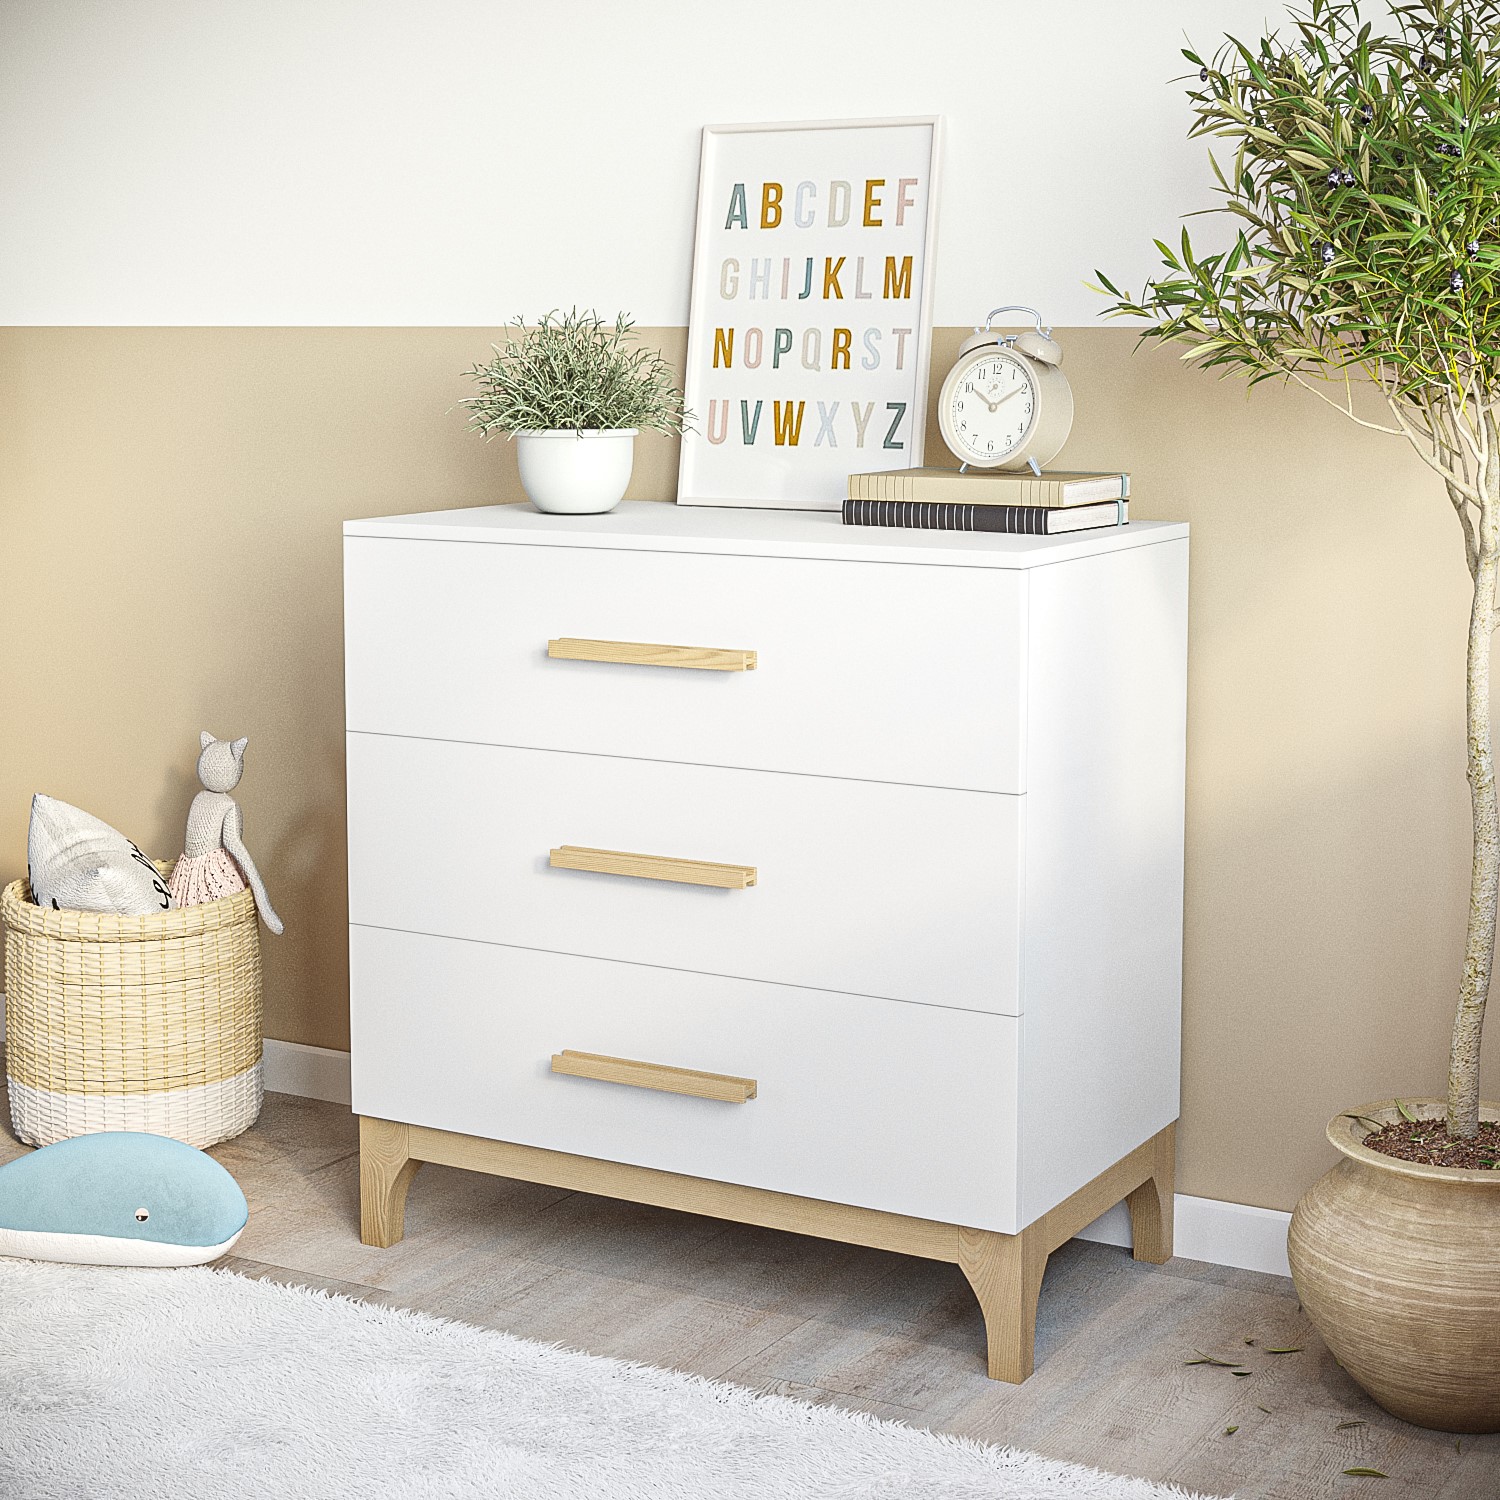 Read more about White and wood baby changing table with drawers rue